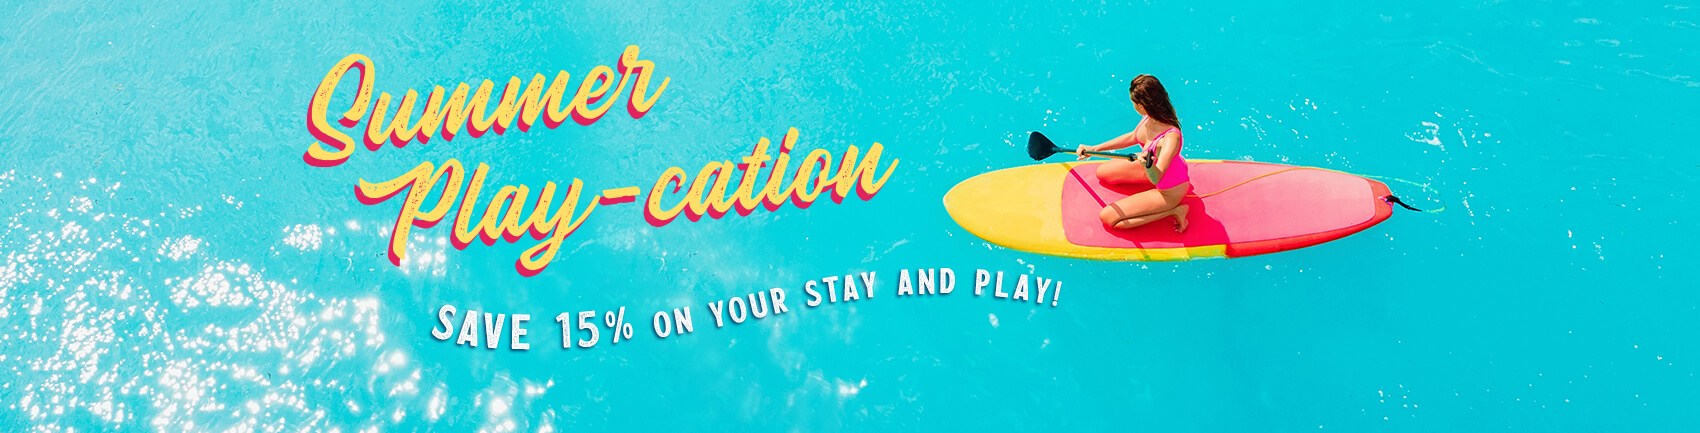 Summer Play-cation. Save 15% on your stay and play!